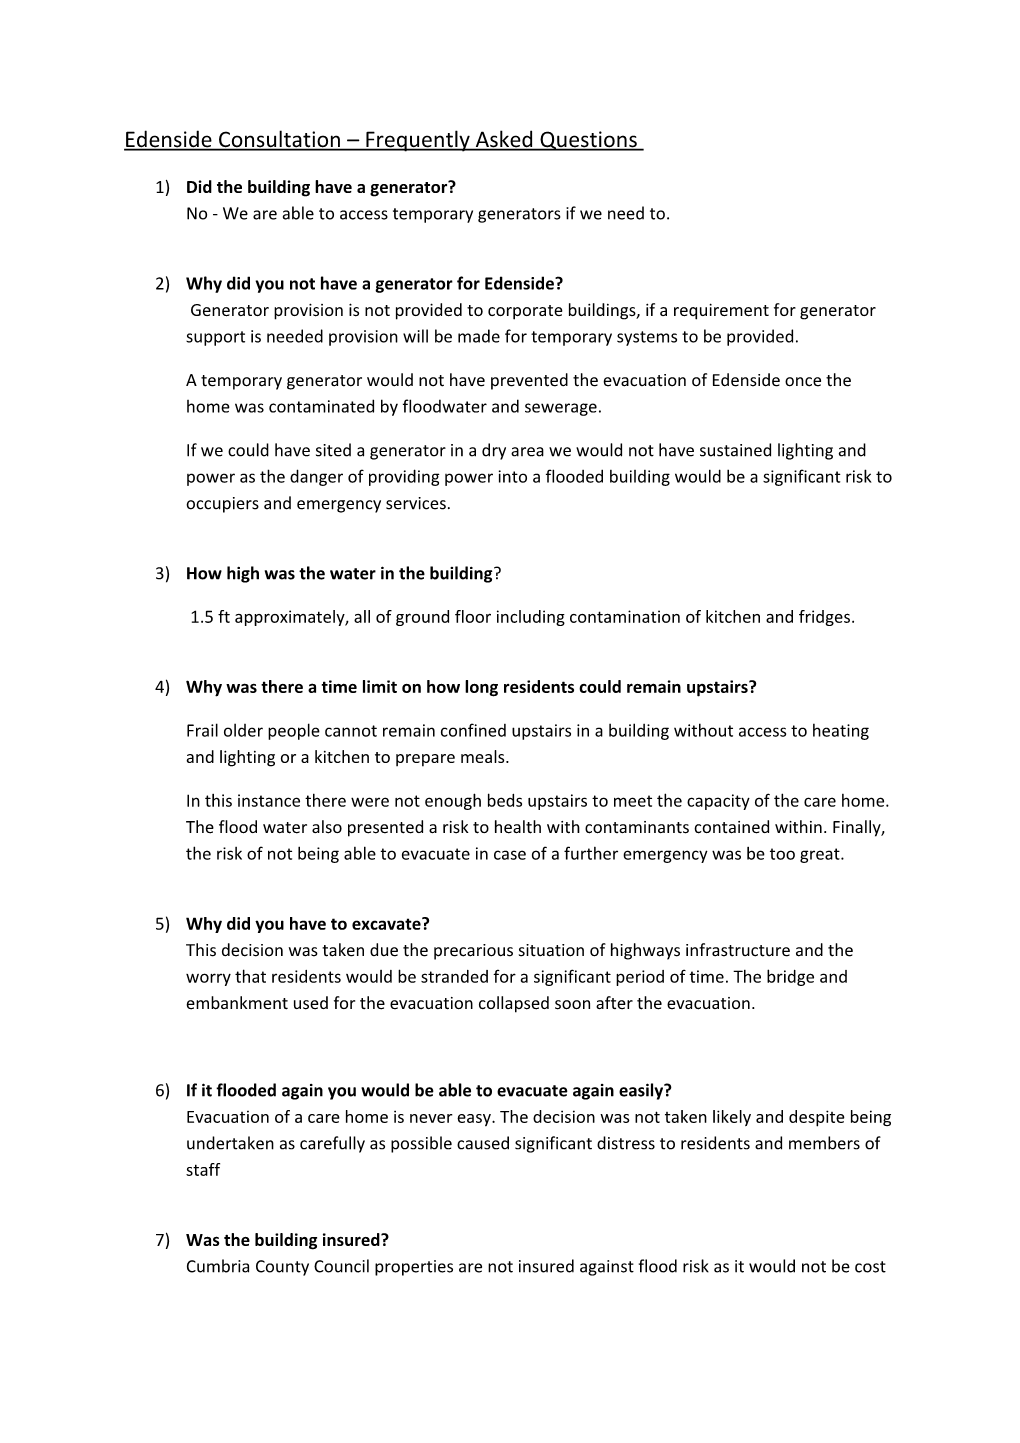 Edenside Consultation Frequently Asked Questions